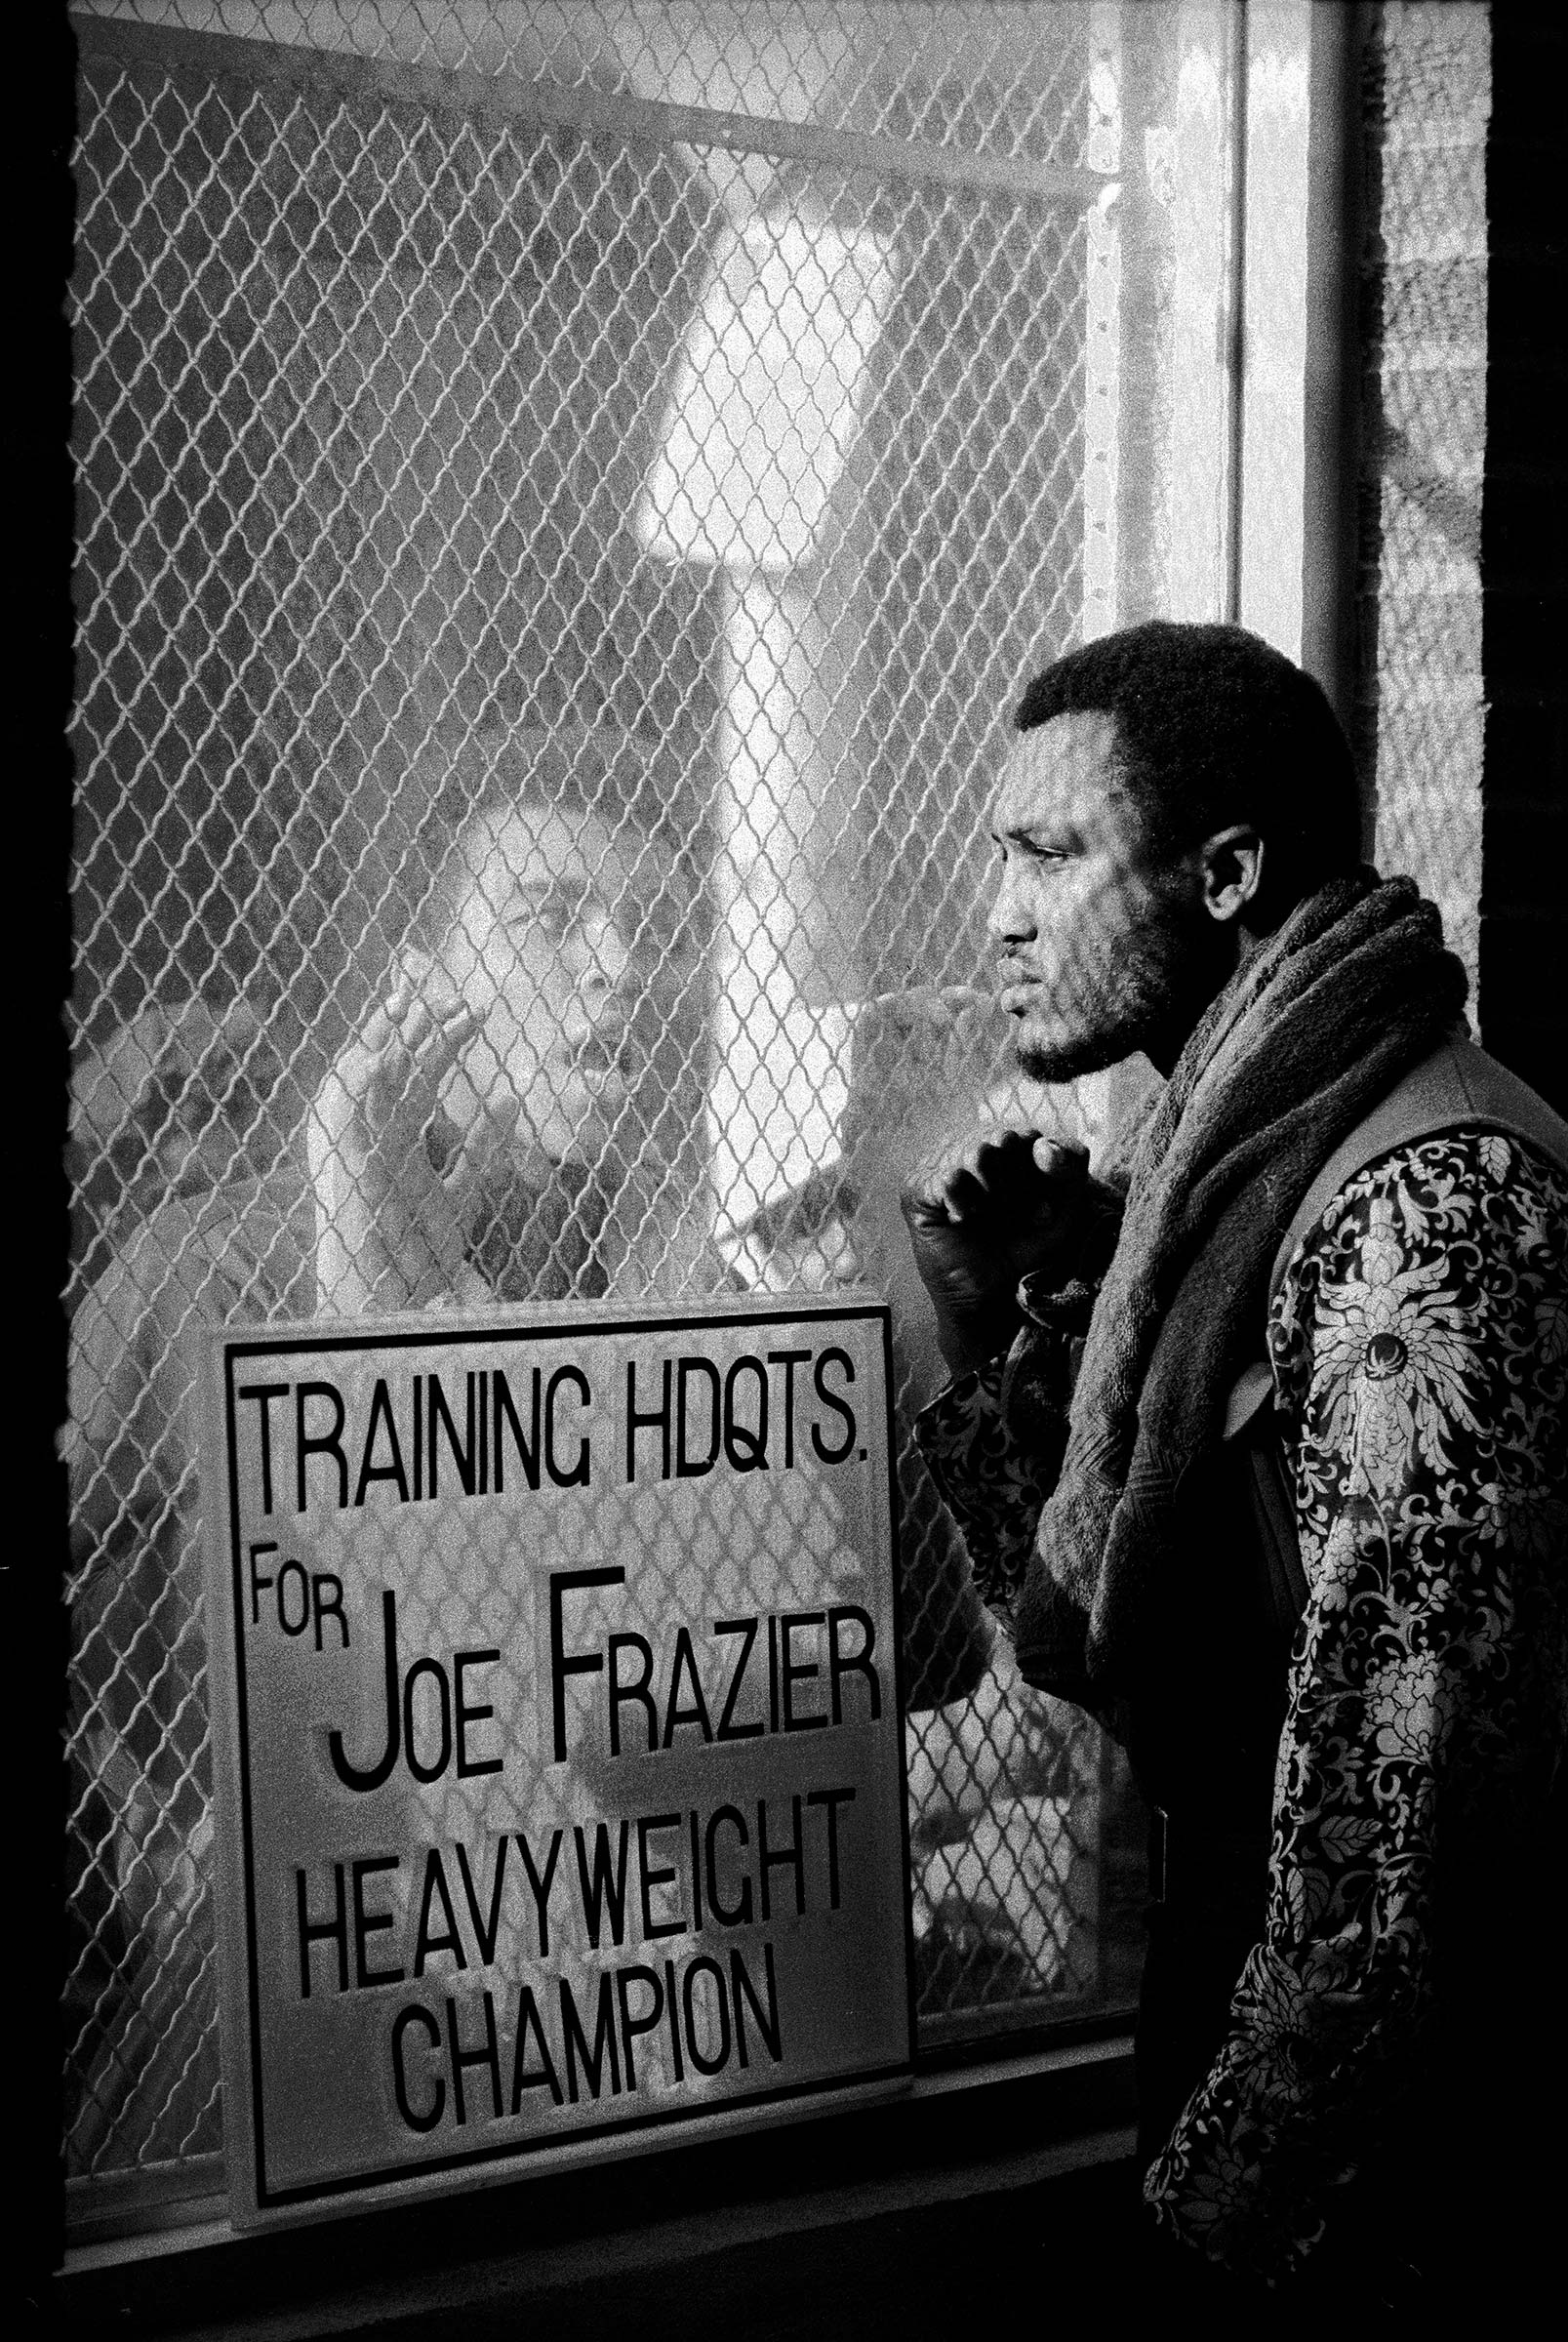 American boxer Muhammad Ali taunts rival boxer Joe Frazier at Frazier's training headquarters in Philadelphia, early 1971. The two men fought for the World Heavyweight Title on March 8—Frazier won.